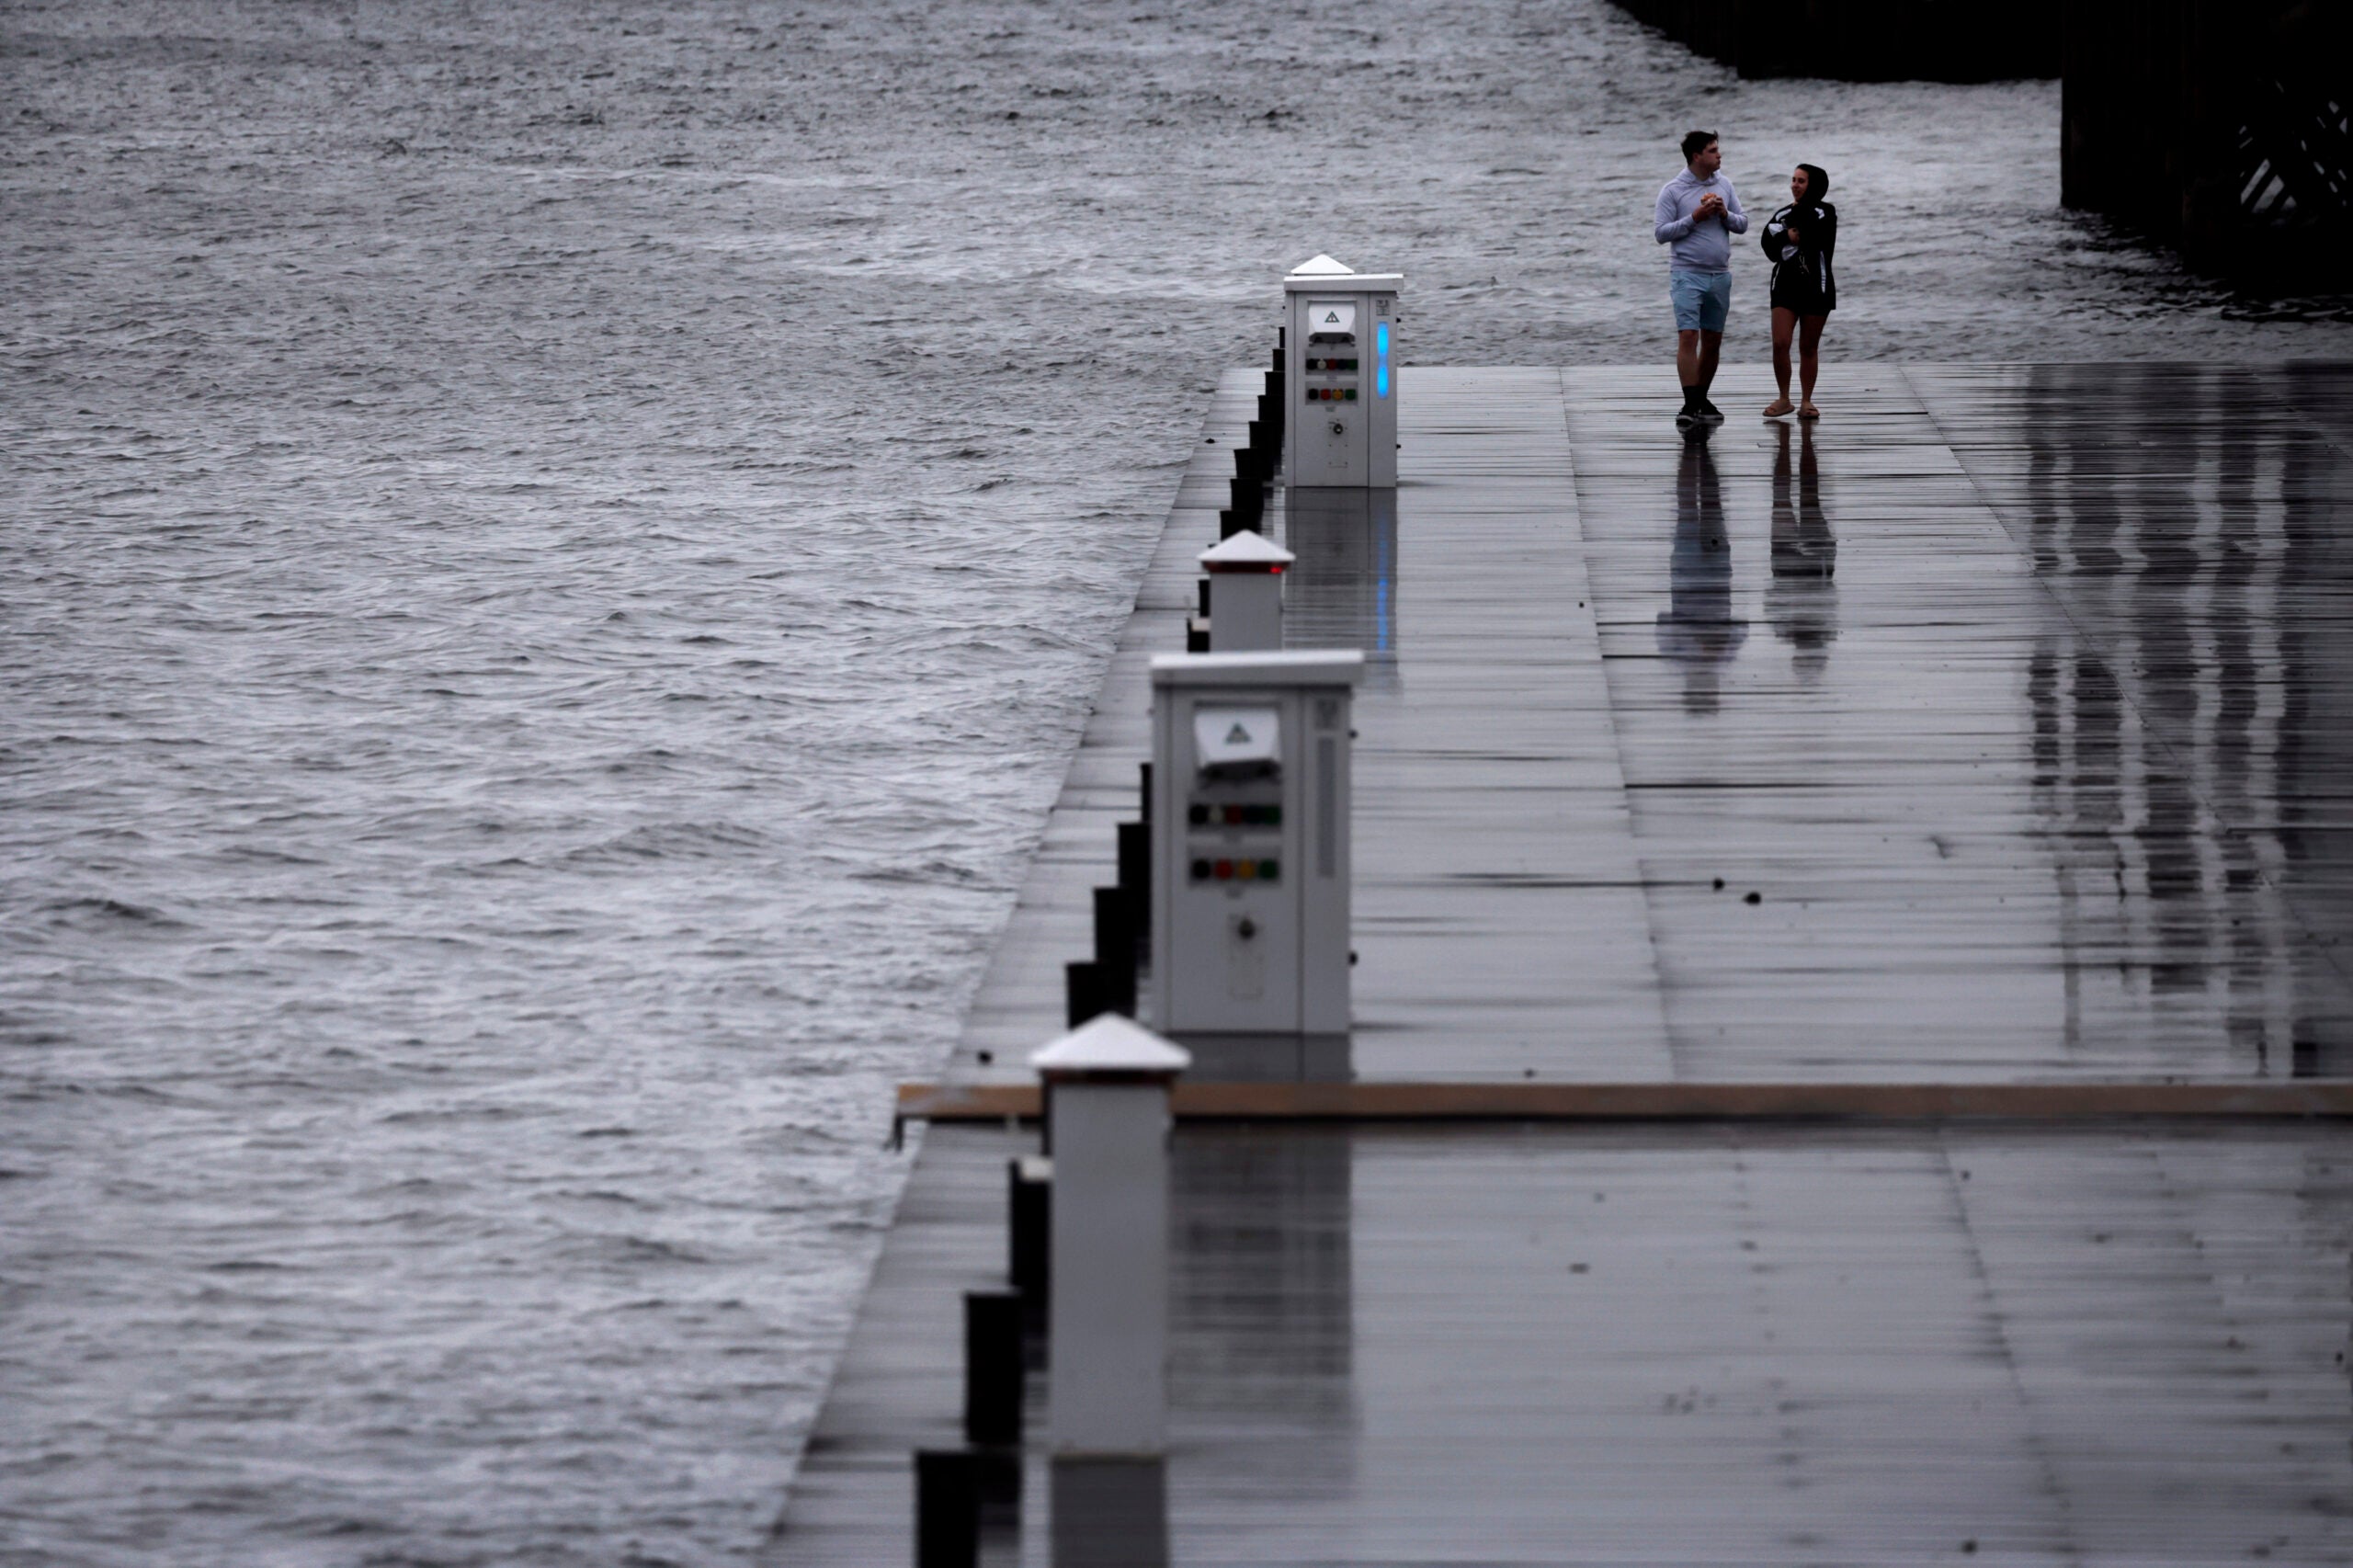 Two people are seen walking on a dock in the Seaport District of Boston along the water on a stormy day.